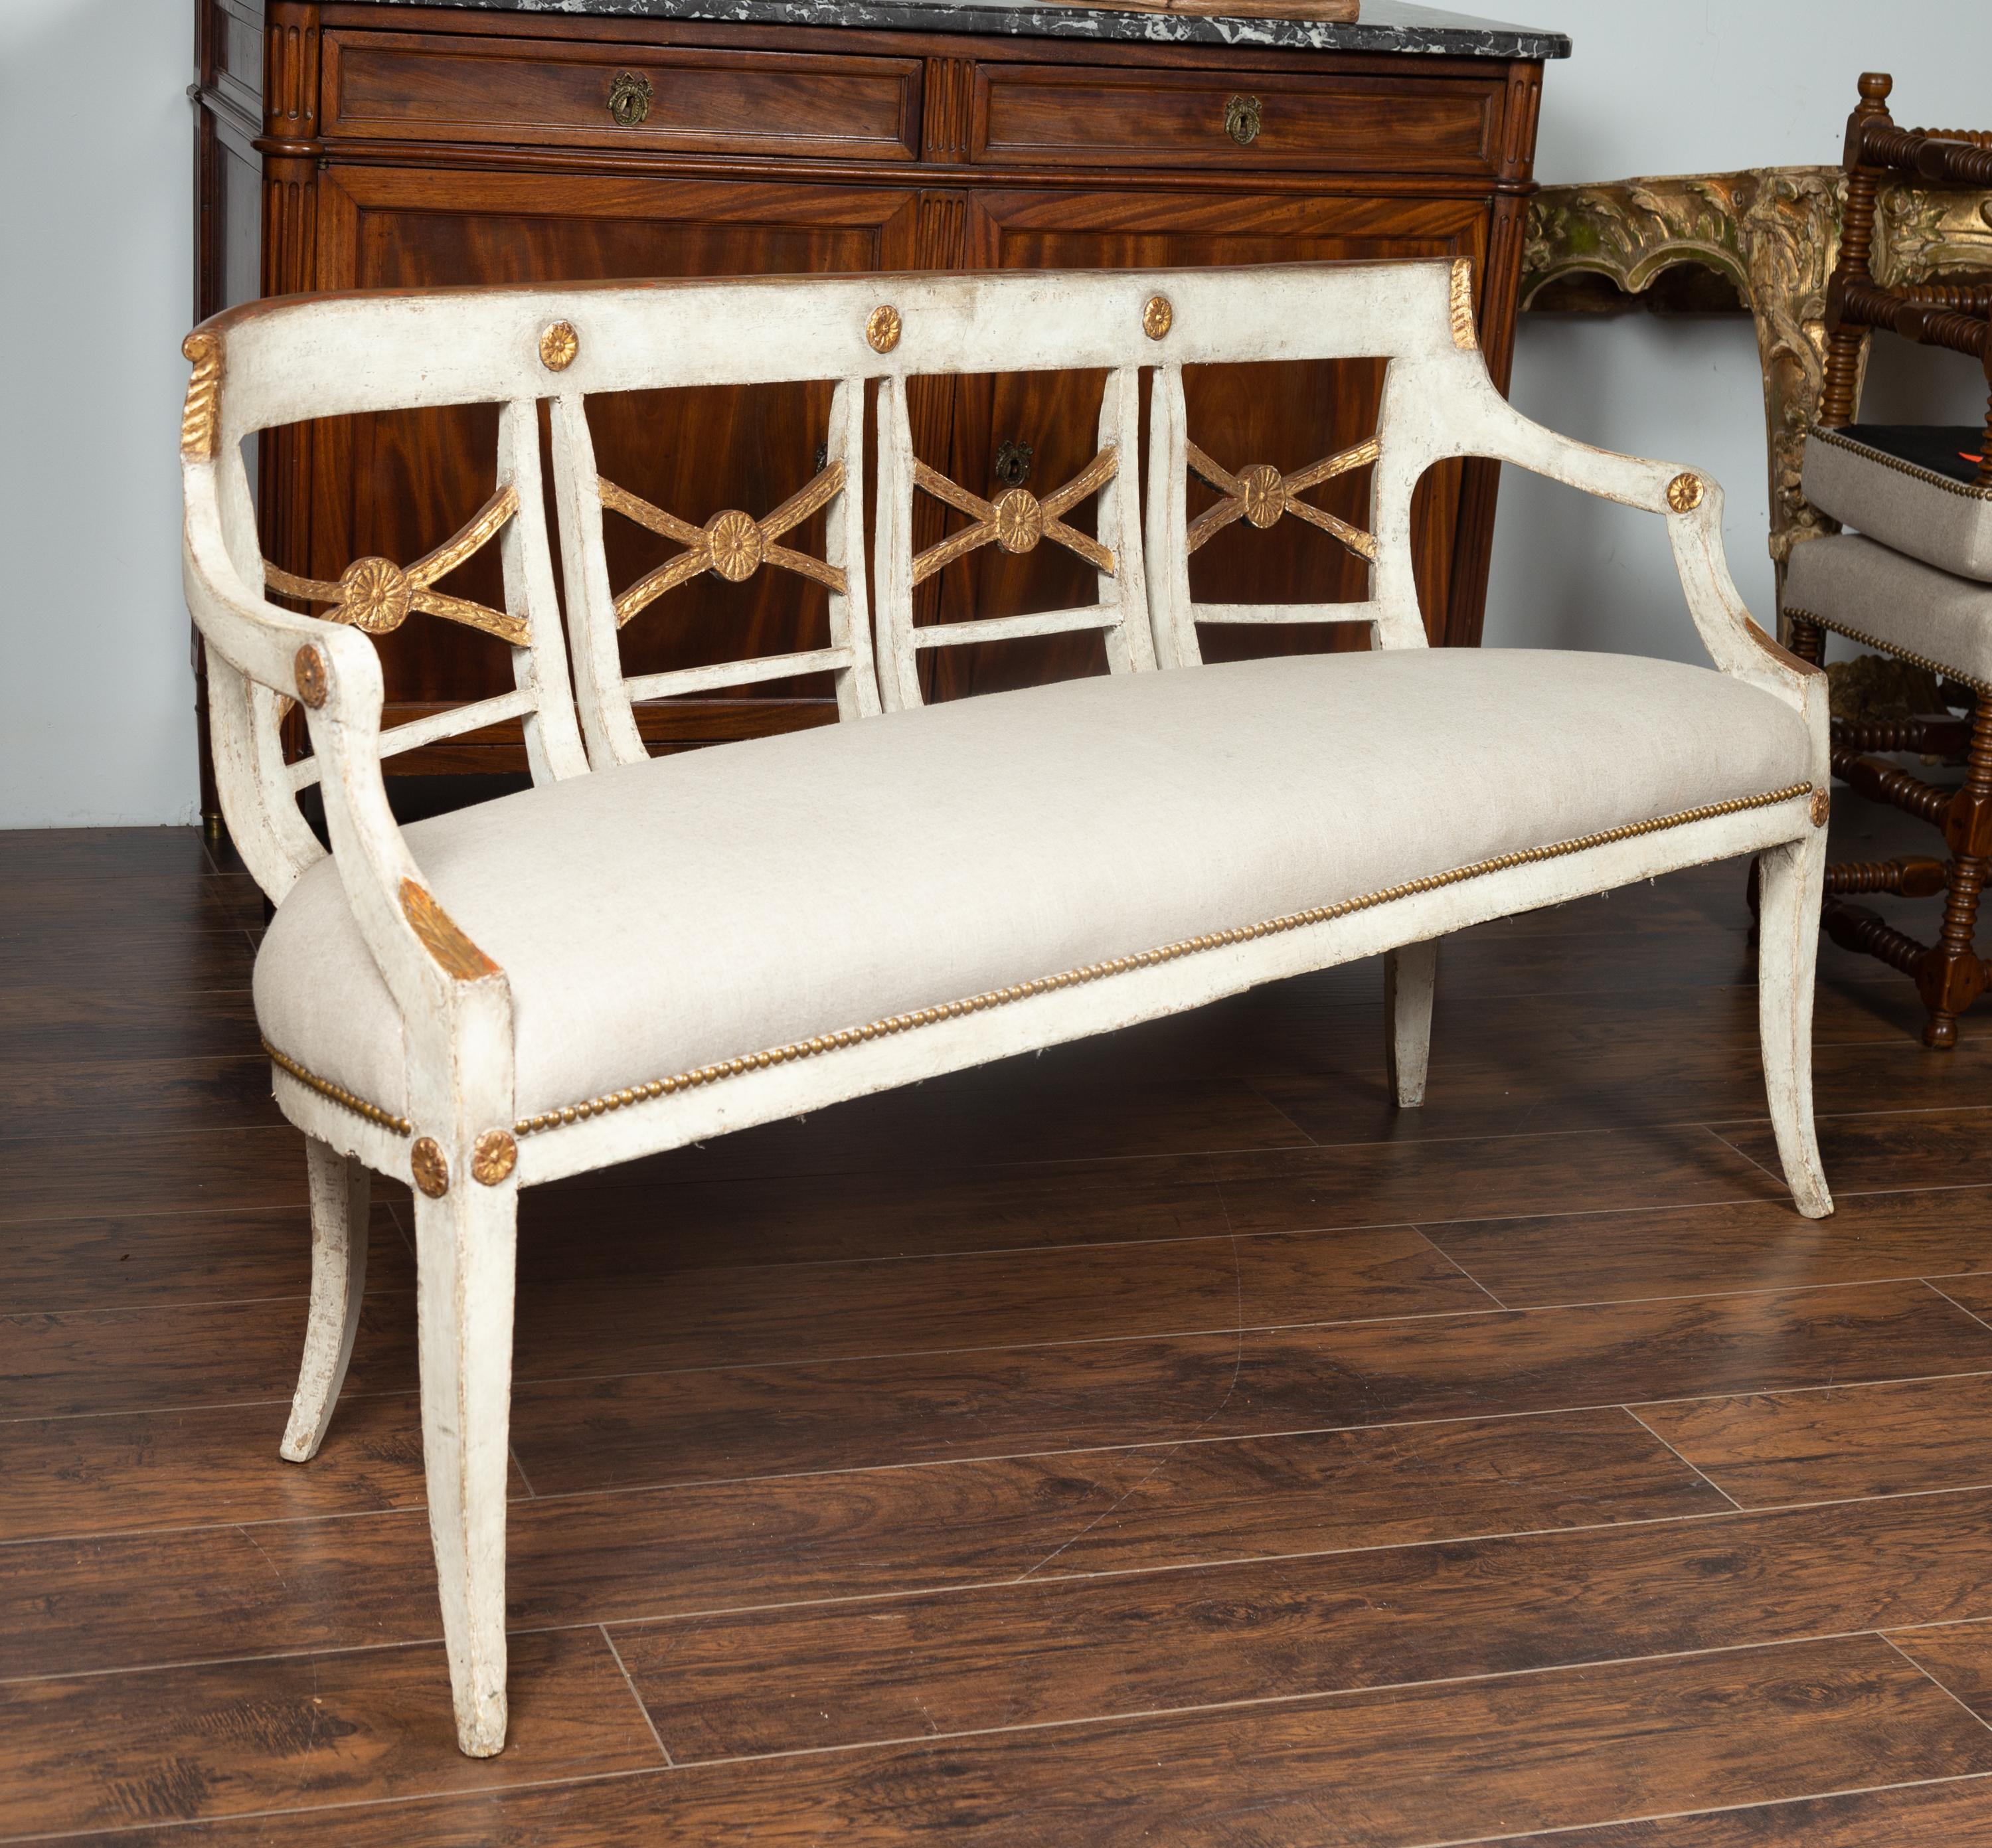 Gilt Italian 1860s Painted Wood Bench with Gilded Accents and New Upholstery For Sale